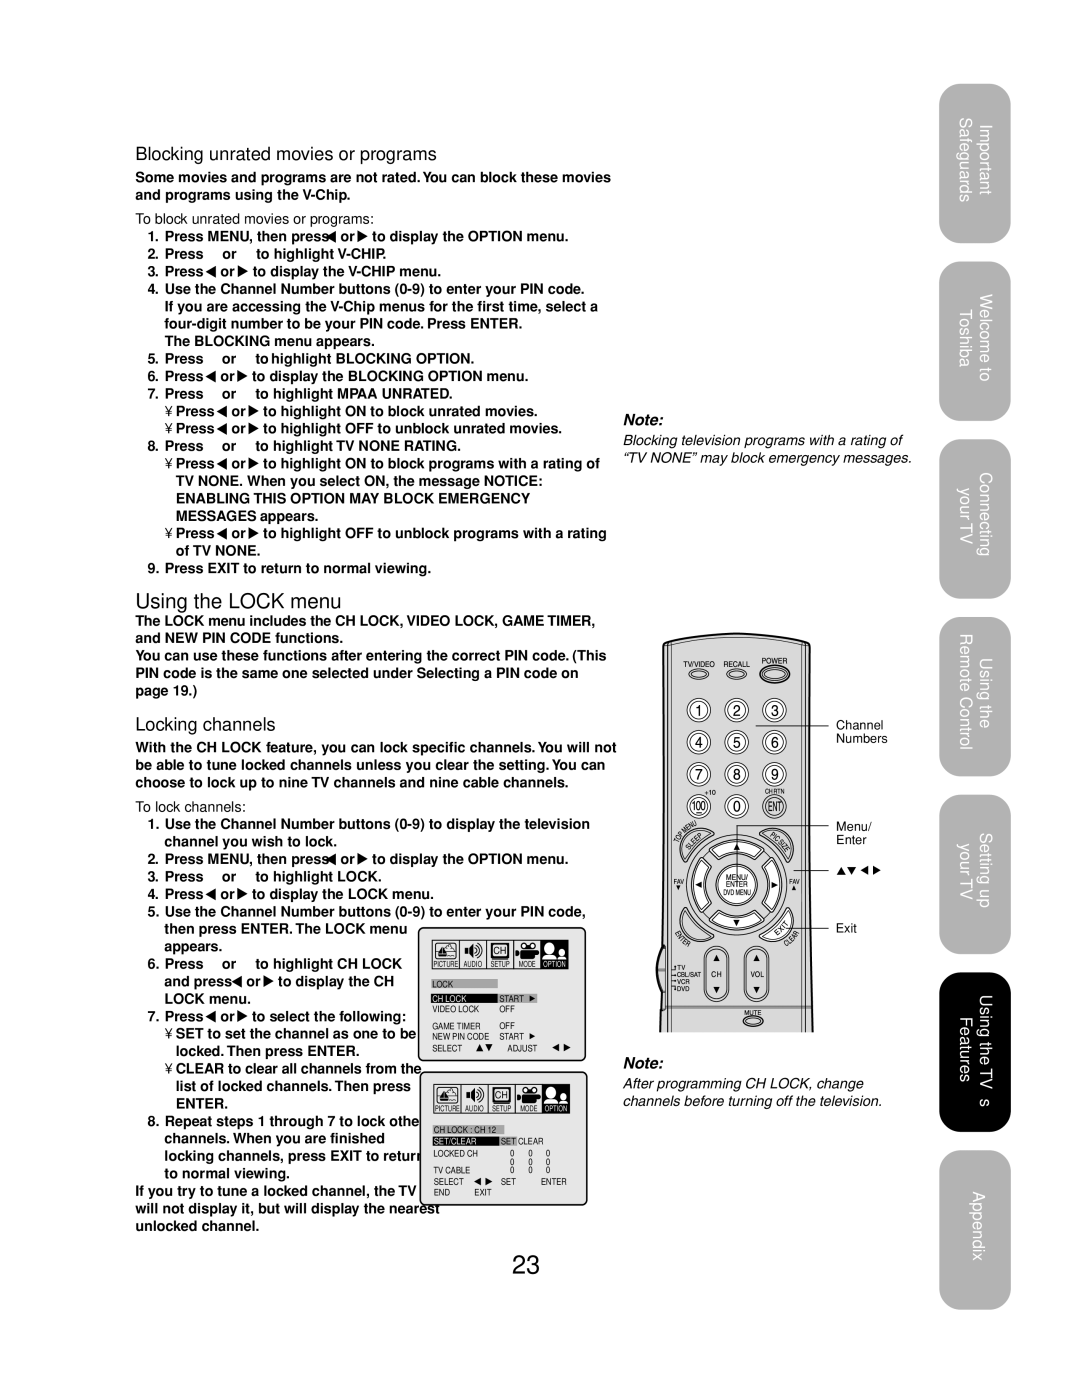 Toshiba 27AF53 appendix Using the Lock menu, Blocking unrated movies or programs, Locking channels 